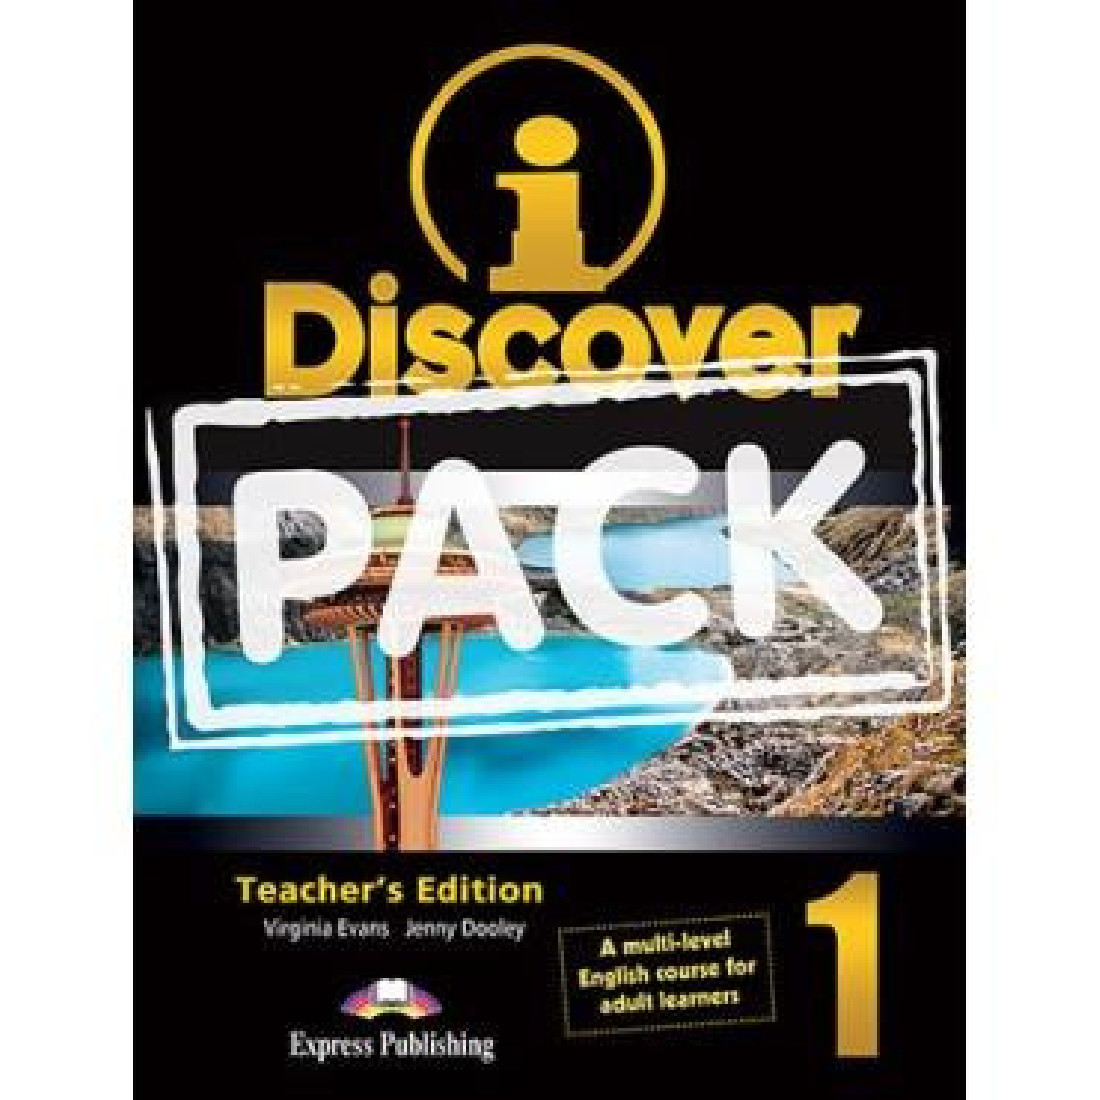 iDISCOVER 1 TCHRS PACK